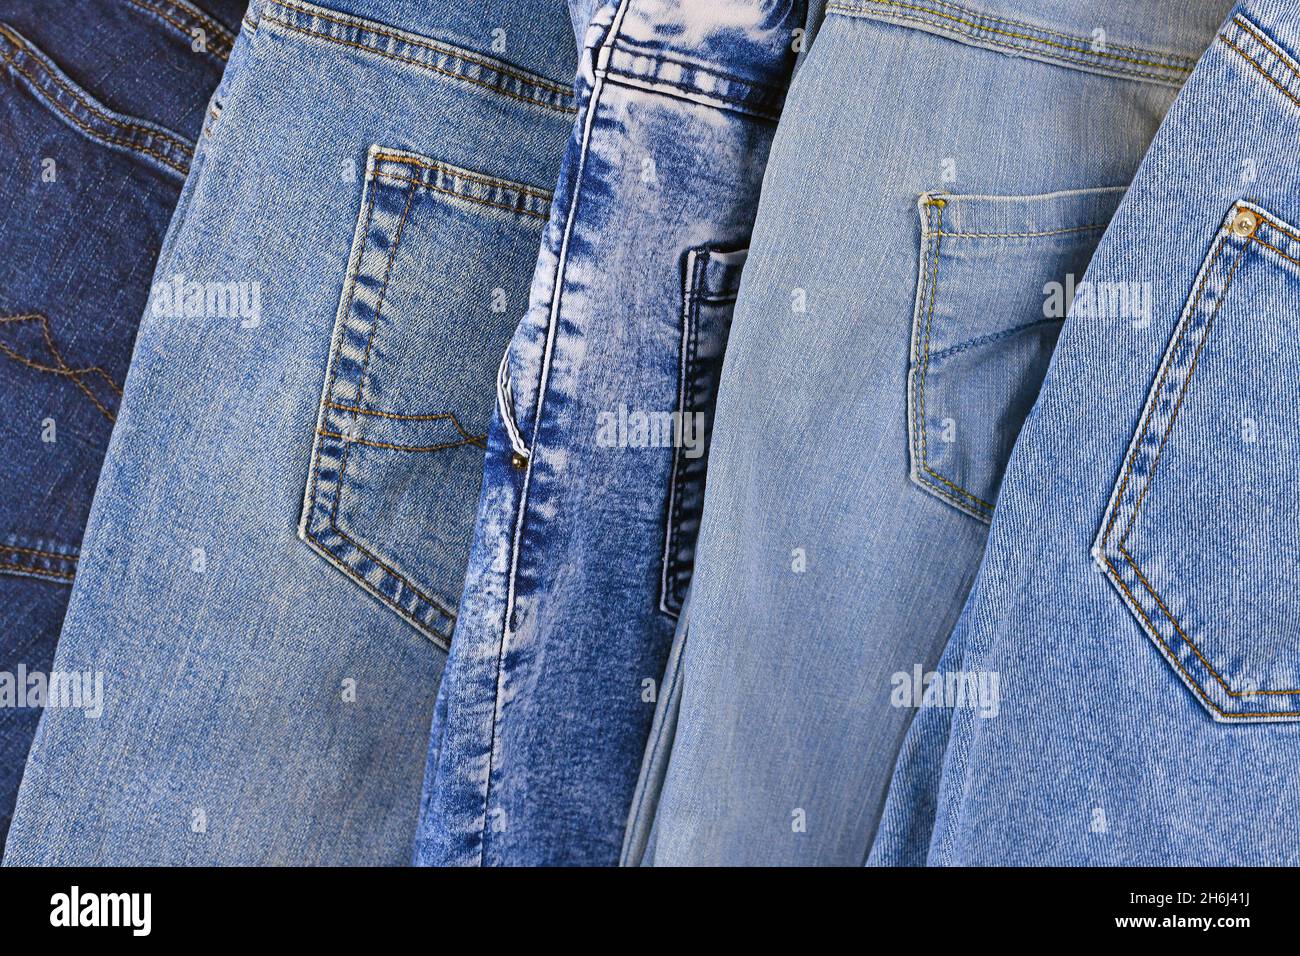 Top view of different colored blue jeans pants Stock Photo